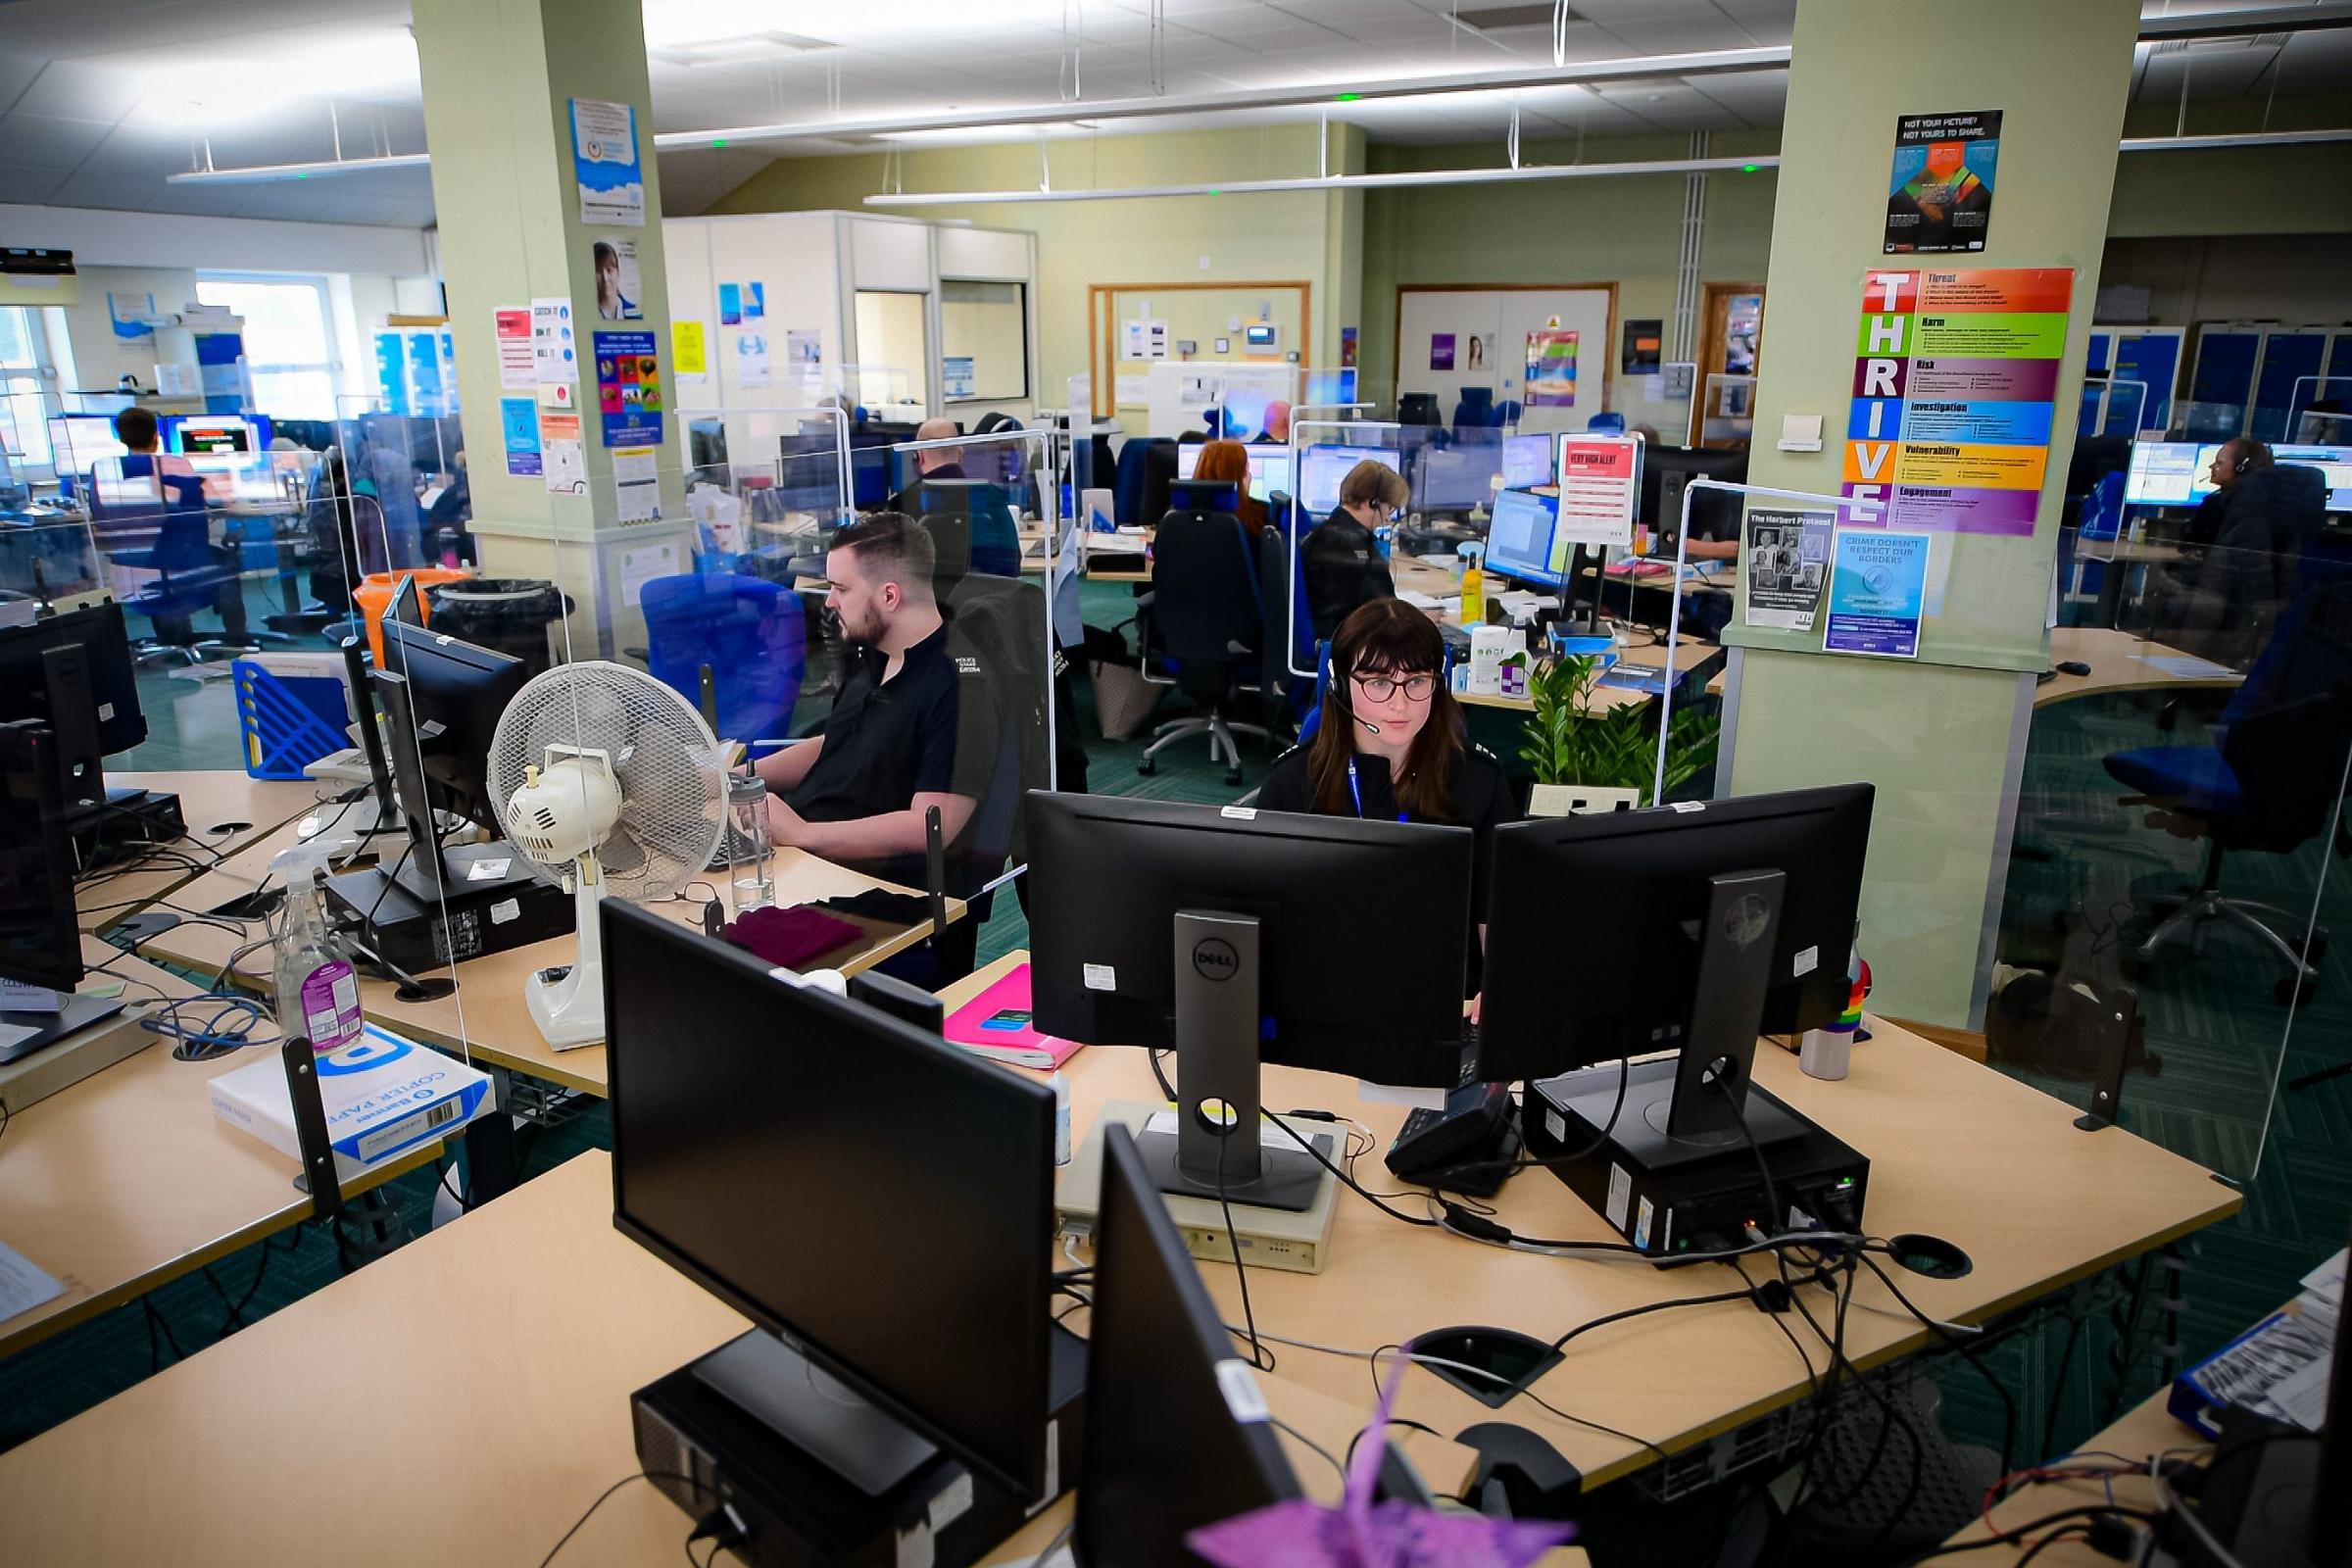 Extra staff will be working in the control rooms. Picture: Ben Birchall/PA